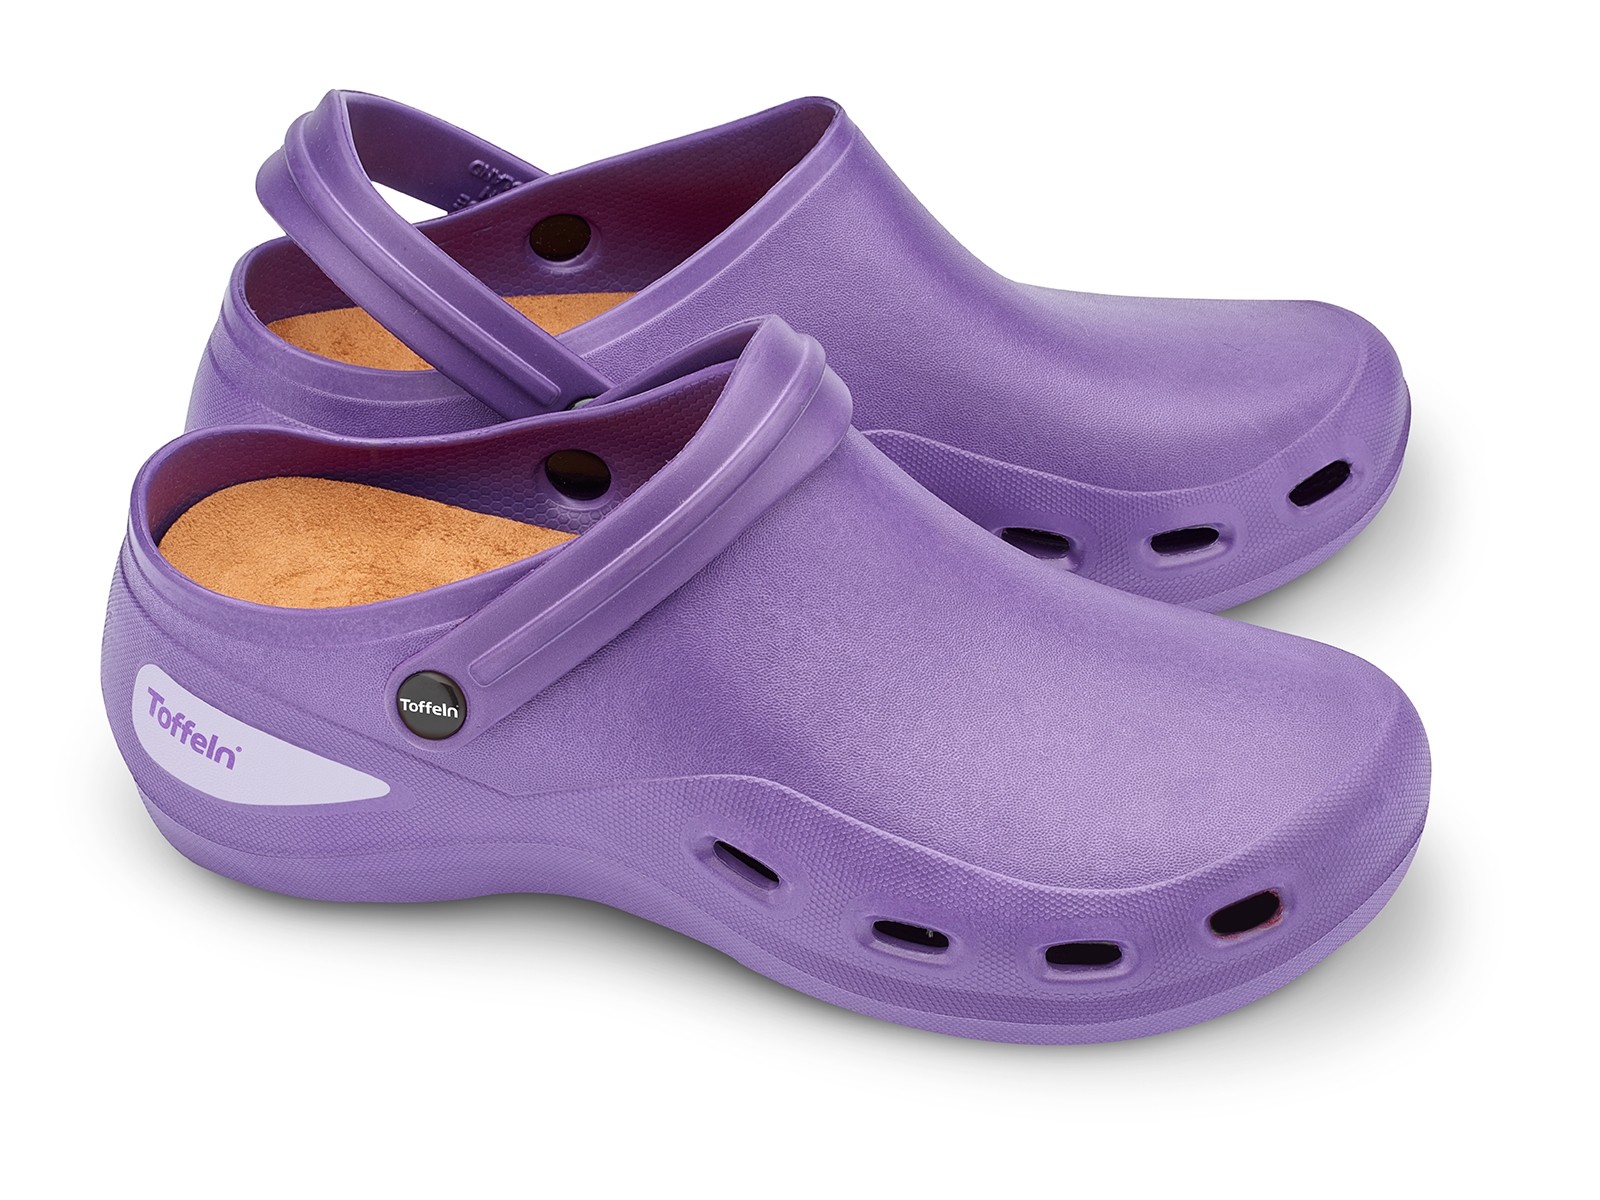 Toffeln AktivKlog Purple for nurses and doctors for £44.95